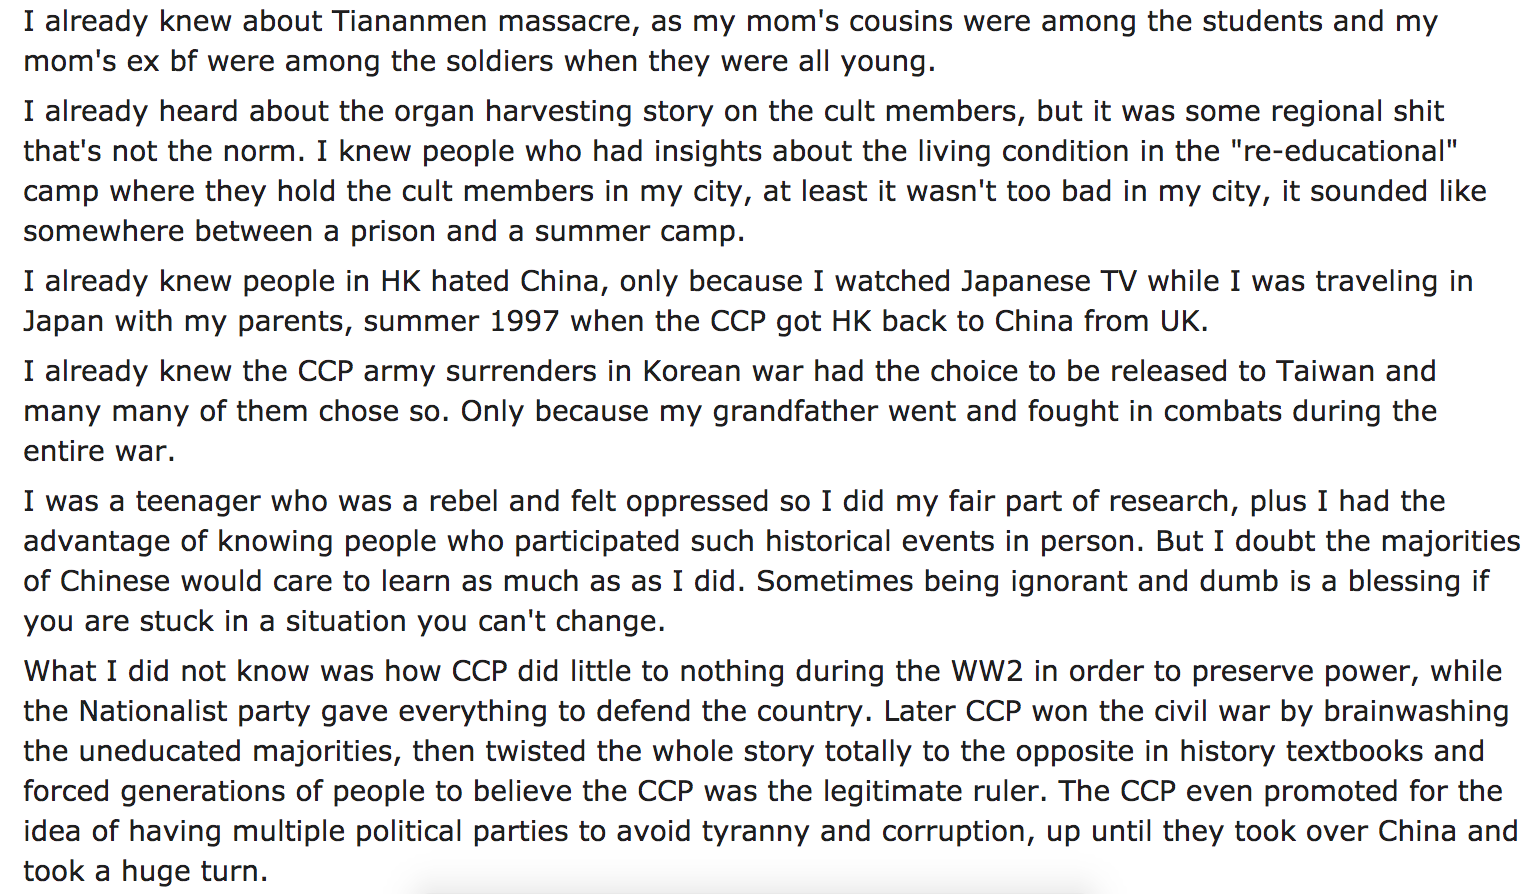 I already knew about Tiananmen massacre, as my mom's cousins were among the students and my mom's ex bf were among the soldiers when they were all young. I already heard about the organ harvesting story on the cult members, but it was some r